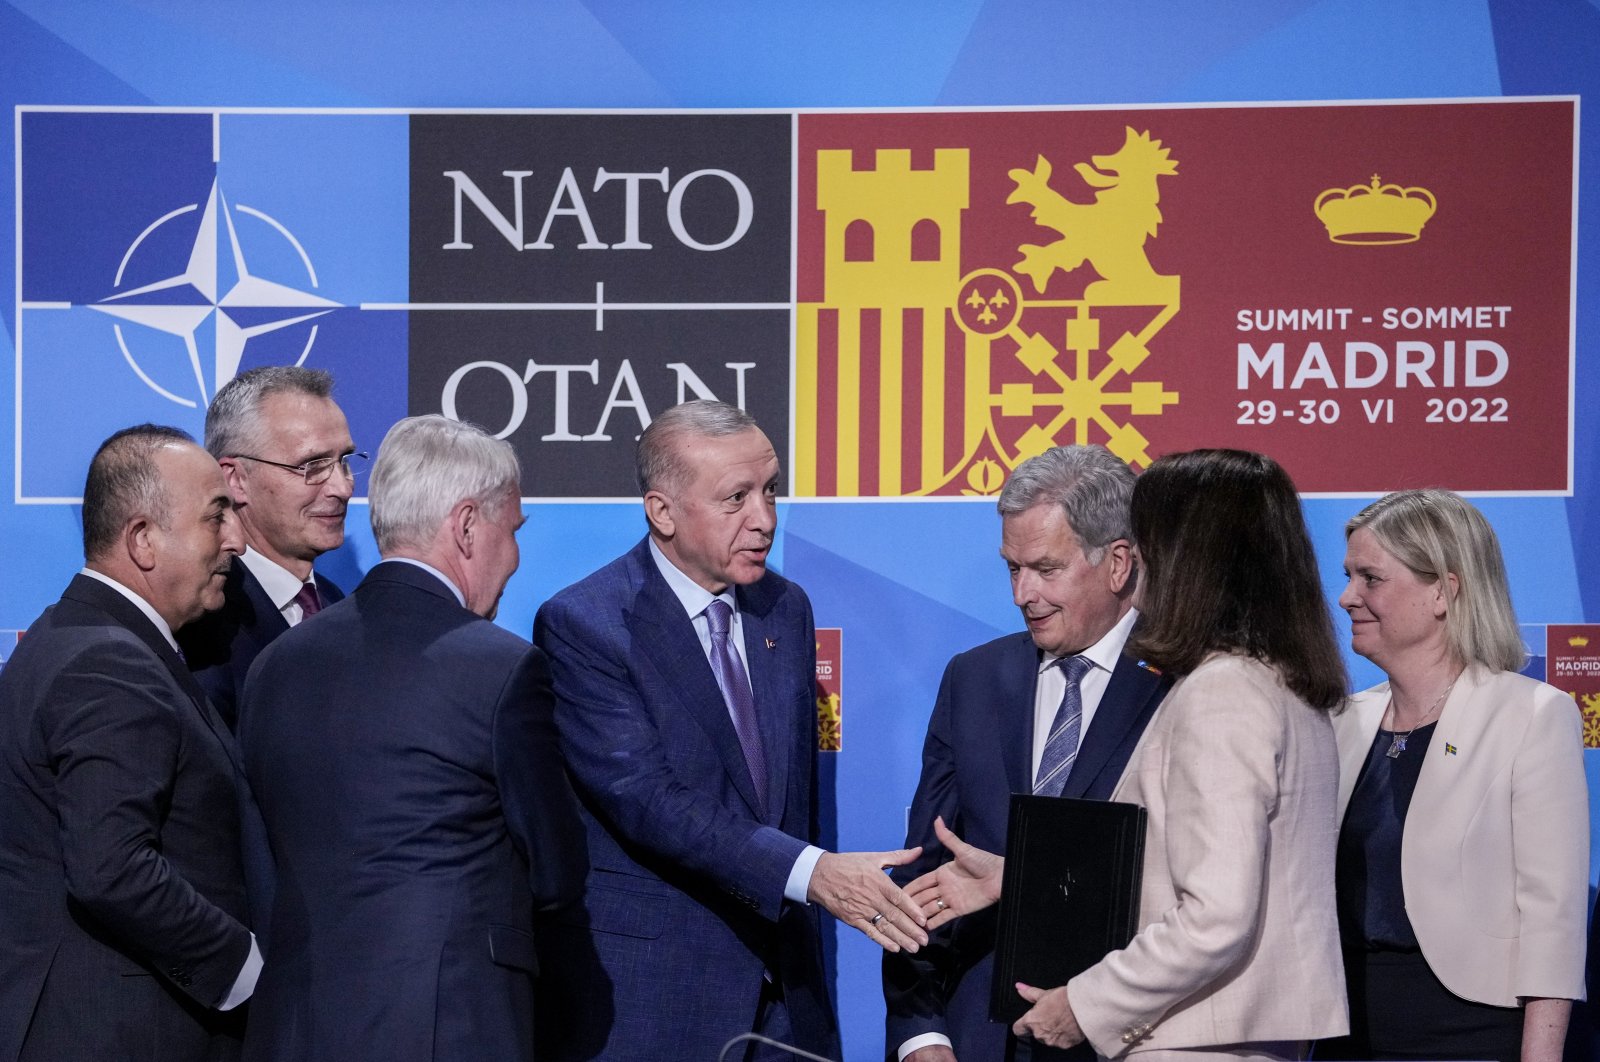 President Recep Tayyip Erdoğan shakes hands with Sweden&amp;#039;s Foreign Minister Ann Linde next to NATO Secretary-General Jens Stoltenberg (2nd L), Finland&amp;#039;s President Sauli Niinisto (3rd R) and Sweden&amp;#039;s Prime Minister Magdalena Andersson after signing a memorandum in which Türkiye agrees to Finland and Sweden&amp;#039;s NATO membership, in Madrid, Spain, June 28, 2022. (AP Photo)